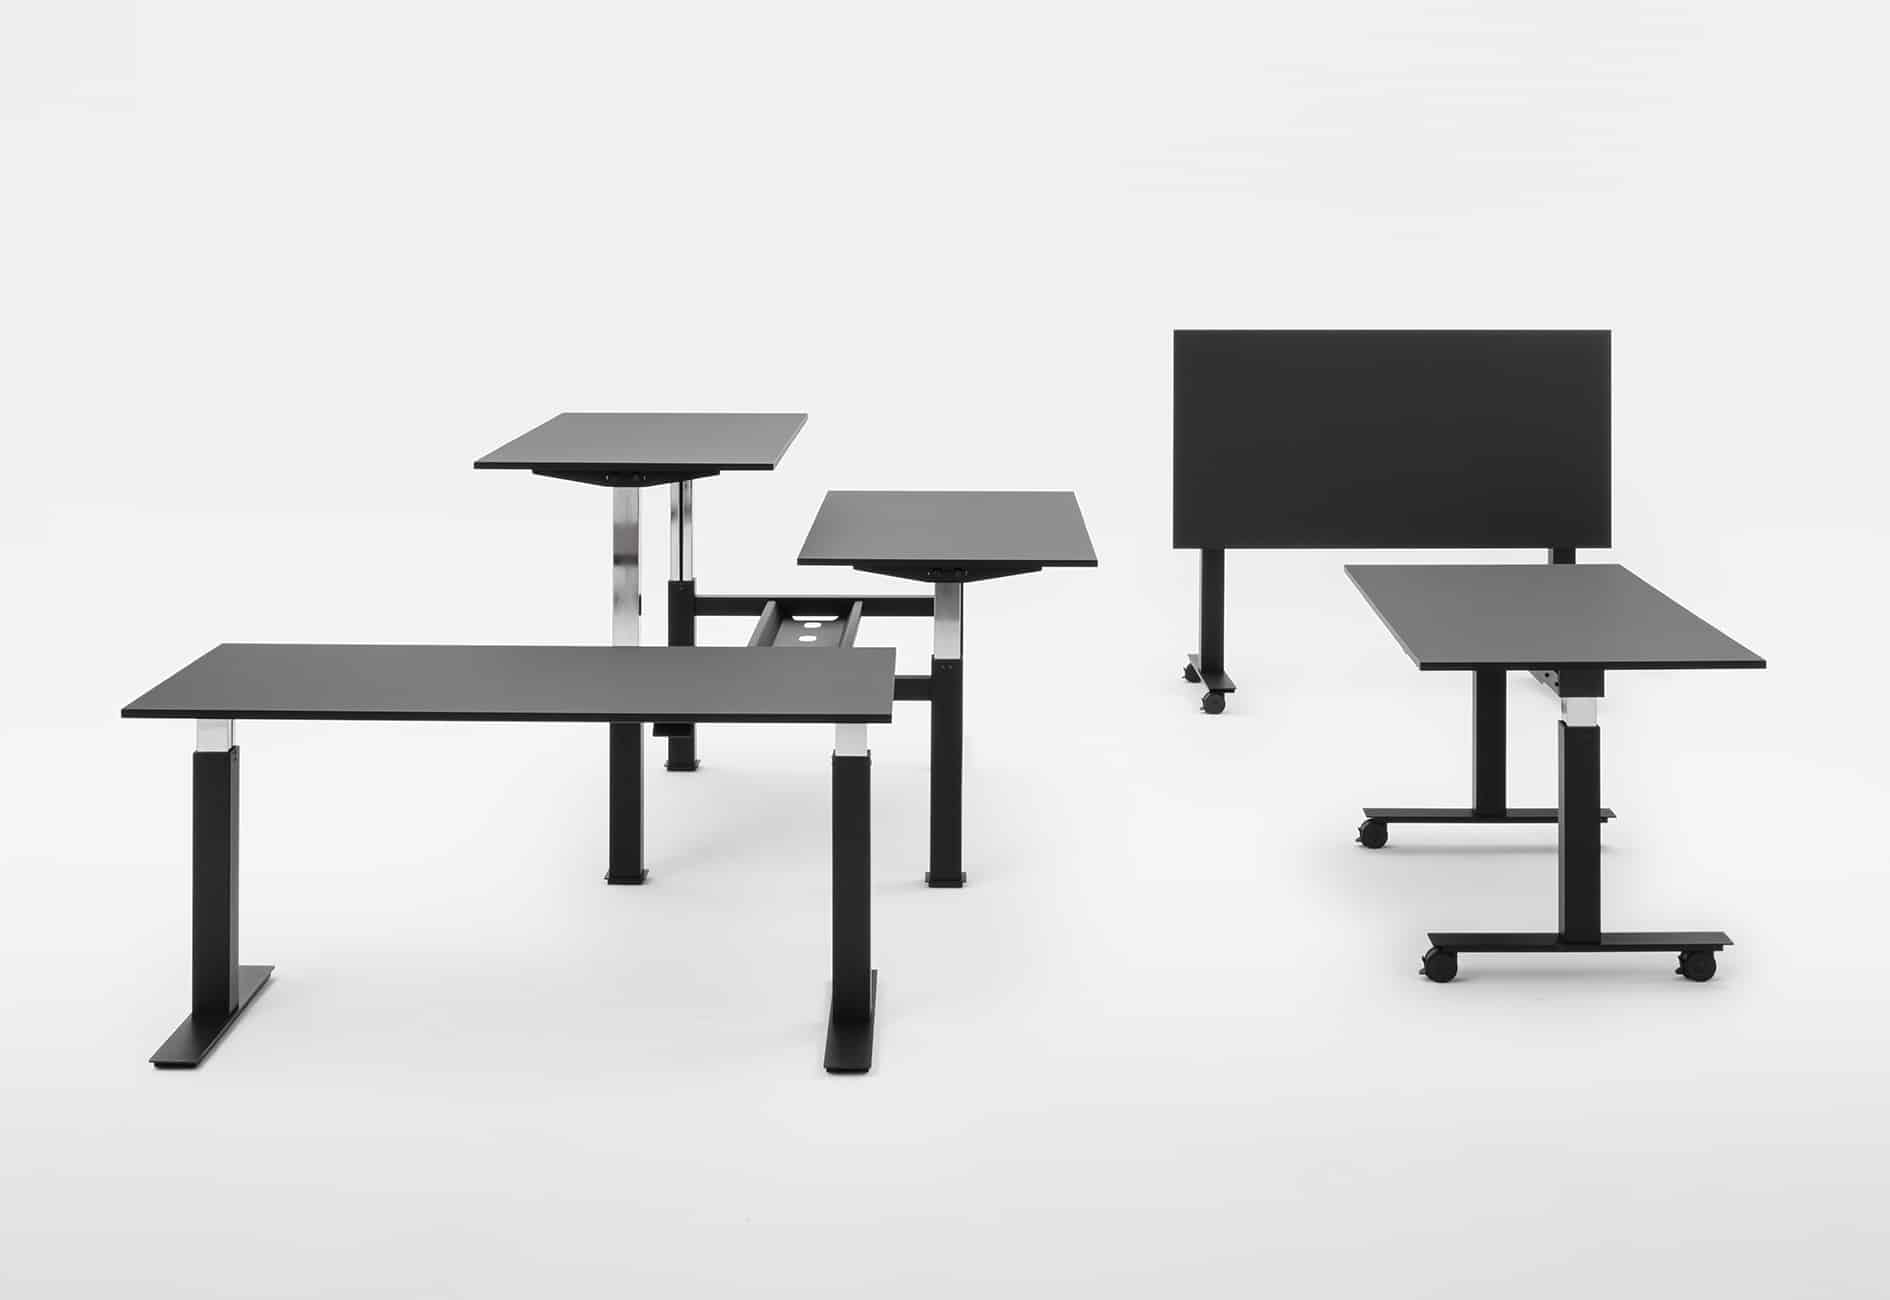 mara-follow-tables-collection_workingspaces_01